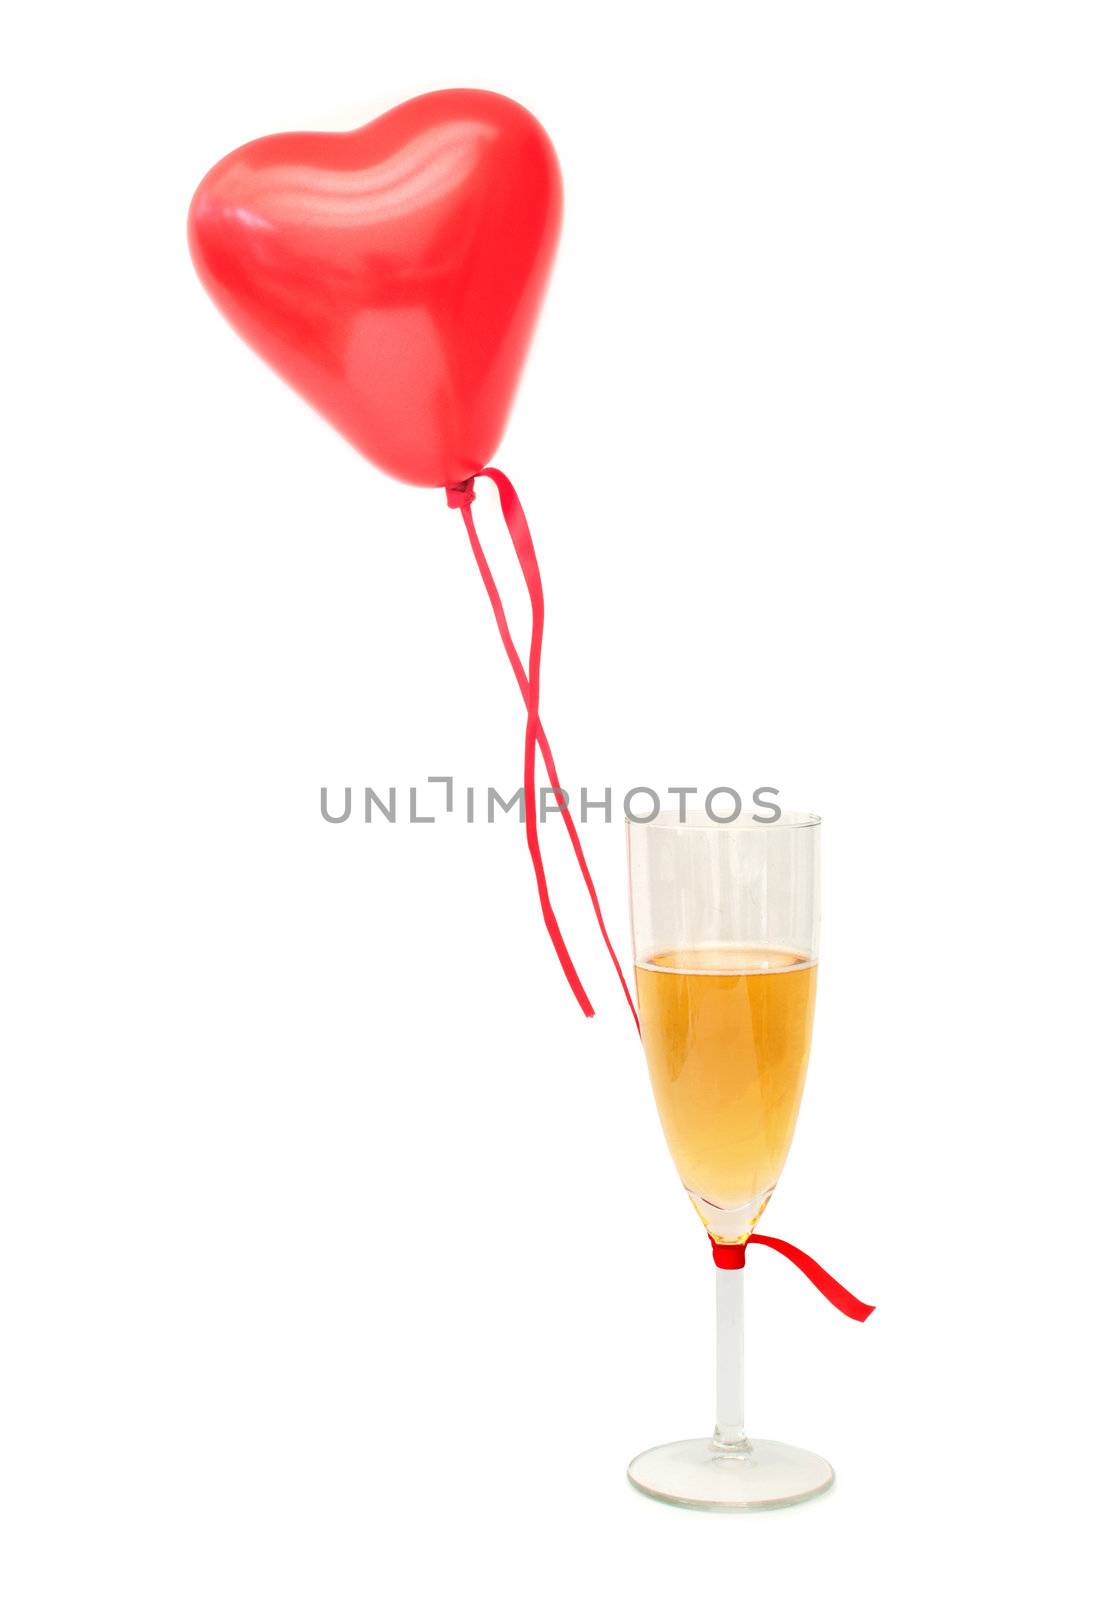 Helium air balloon tied to a glass of champagne over a white background